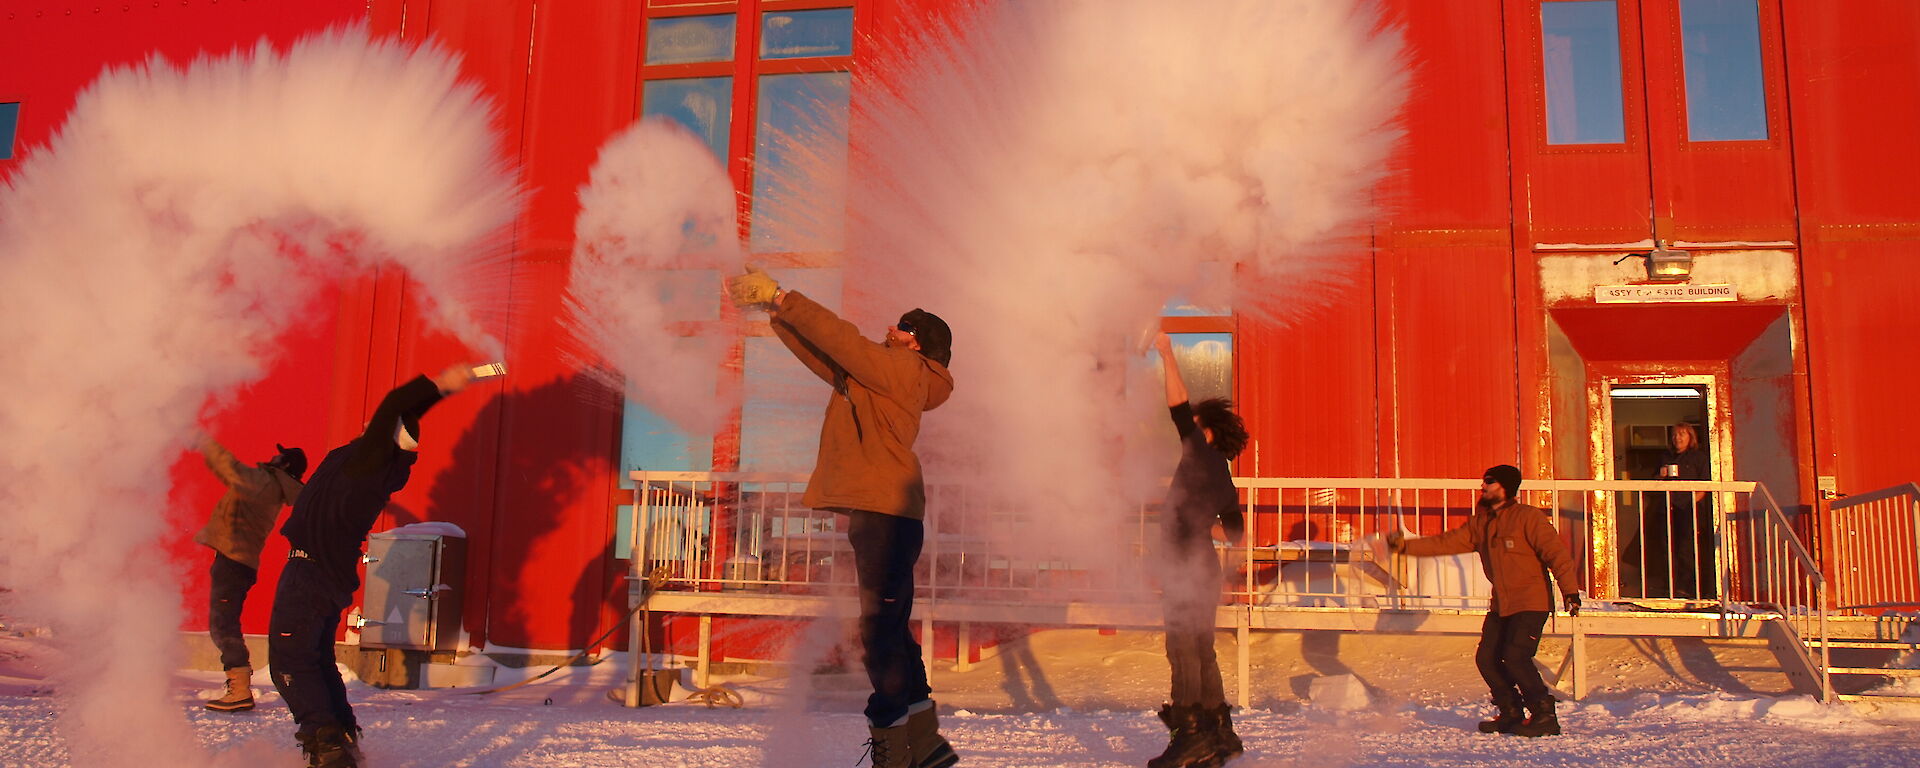 A team of expeditioners throwing boiling water from jugs into the cold air